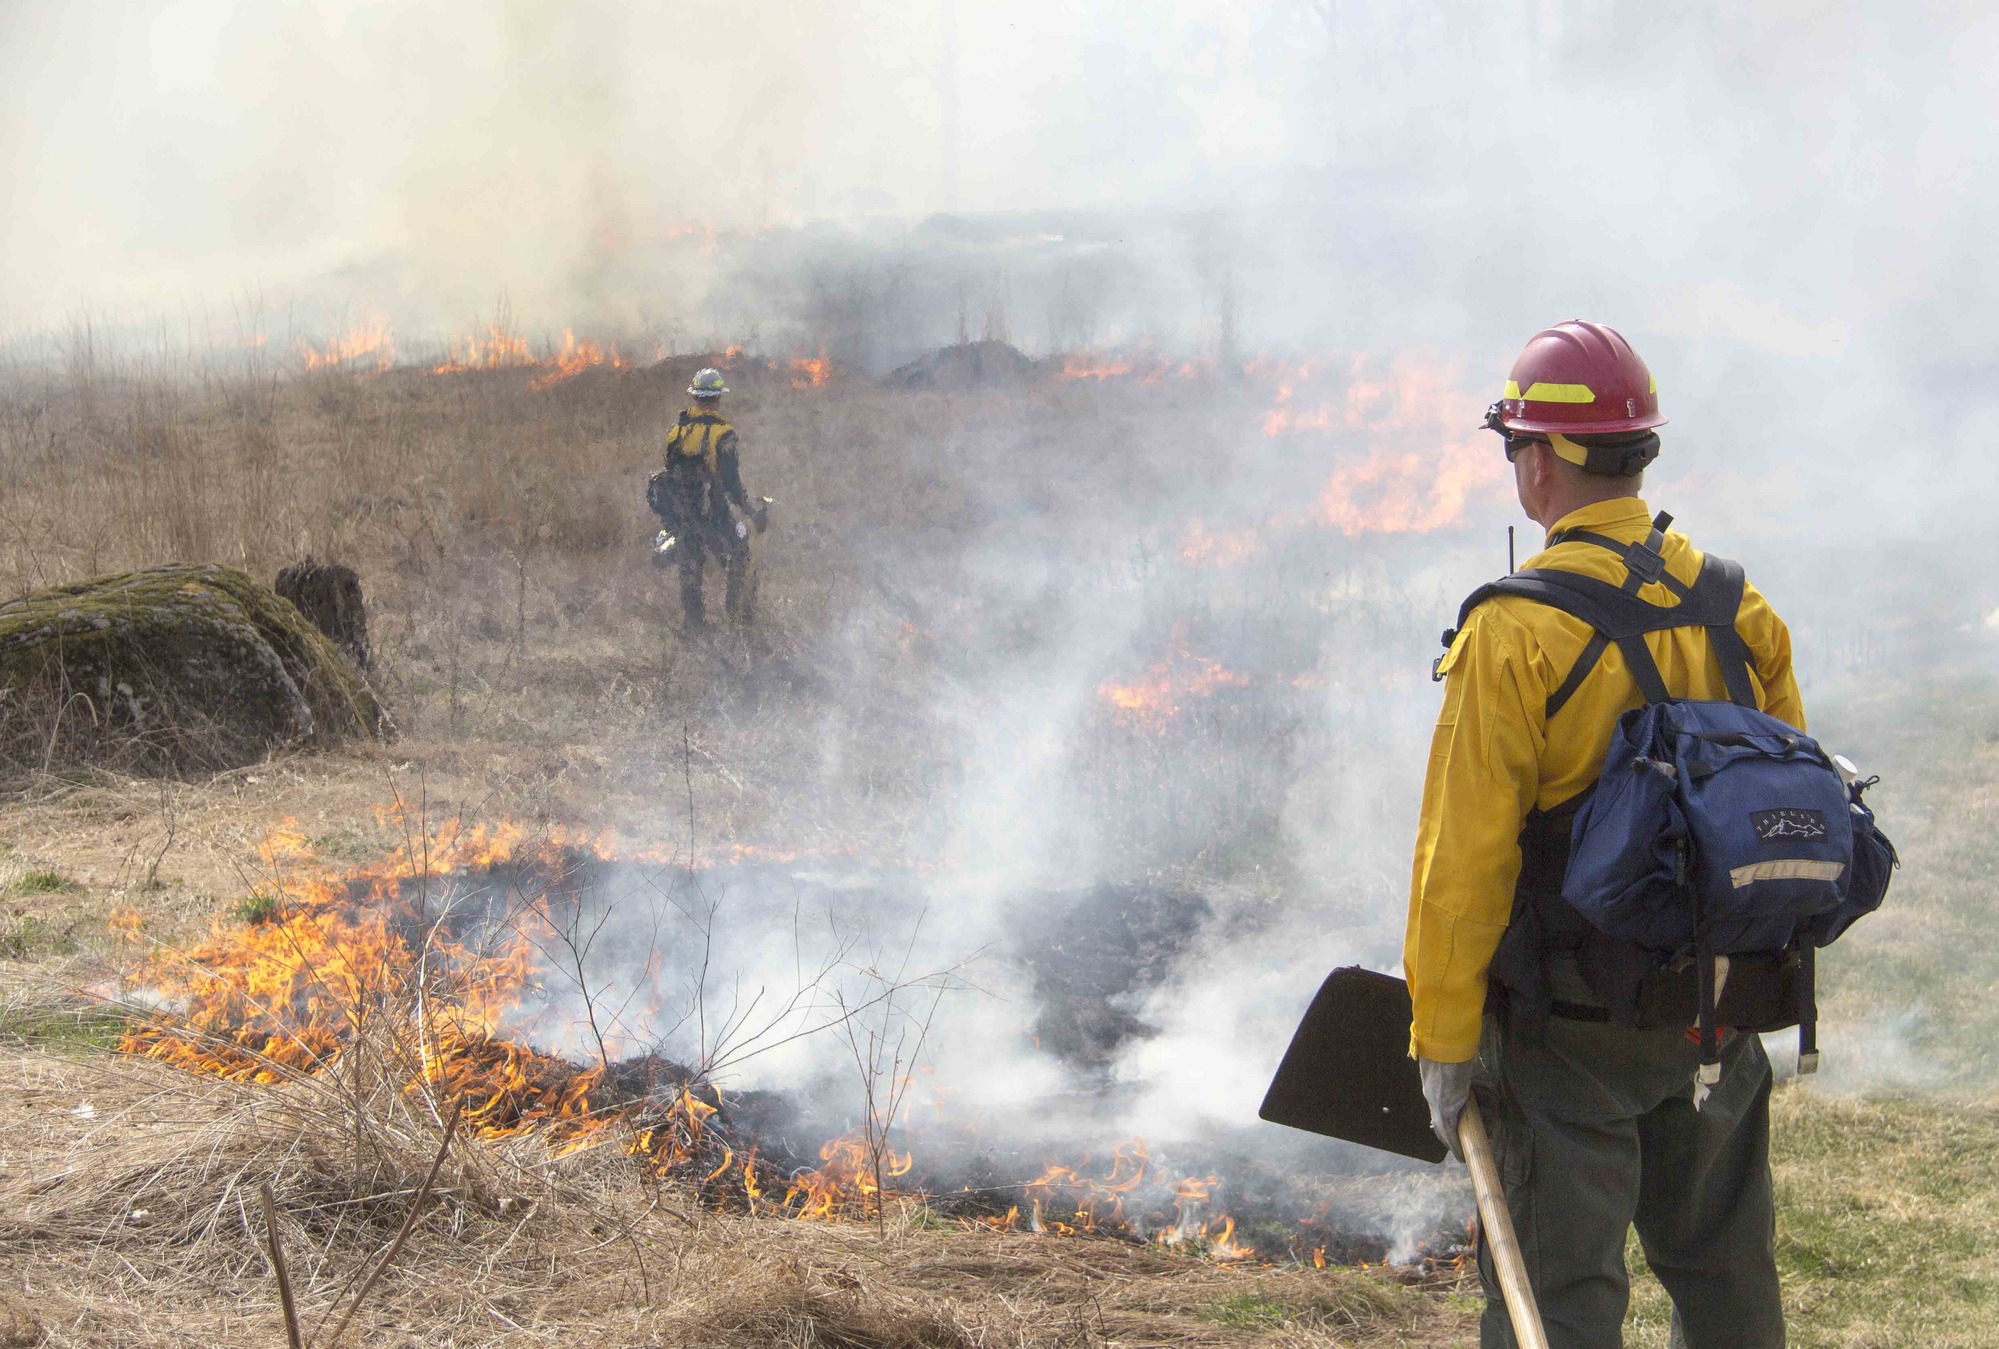 Firefighters monitor the prescribed fire as it moves across the fields along the slope of Big Round Top. One firefighter is to the right of the foreground. He is wearing a yellow jacket and hard hat. He is holding a shovel. There is a firefighter in the background. Smoke and fire are present. 